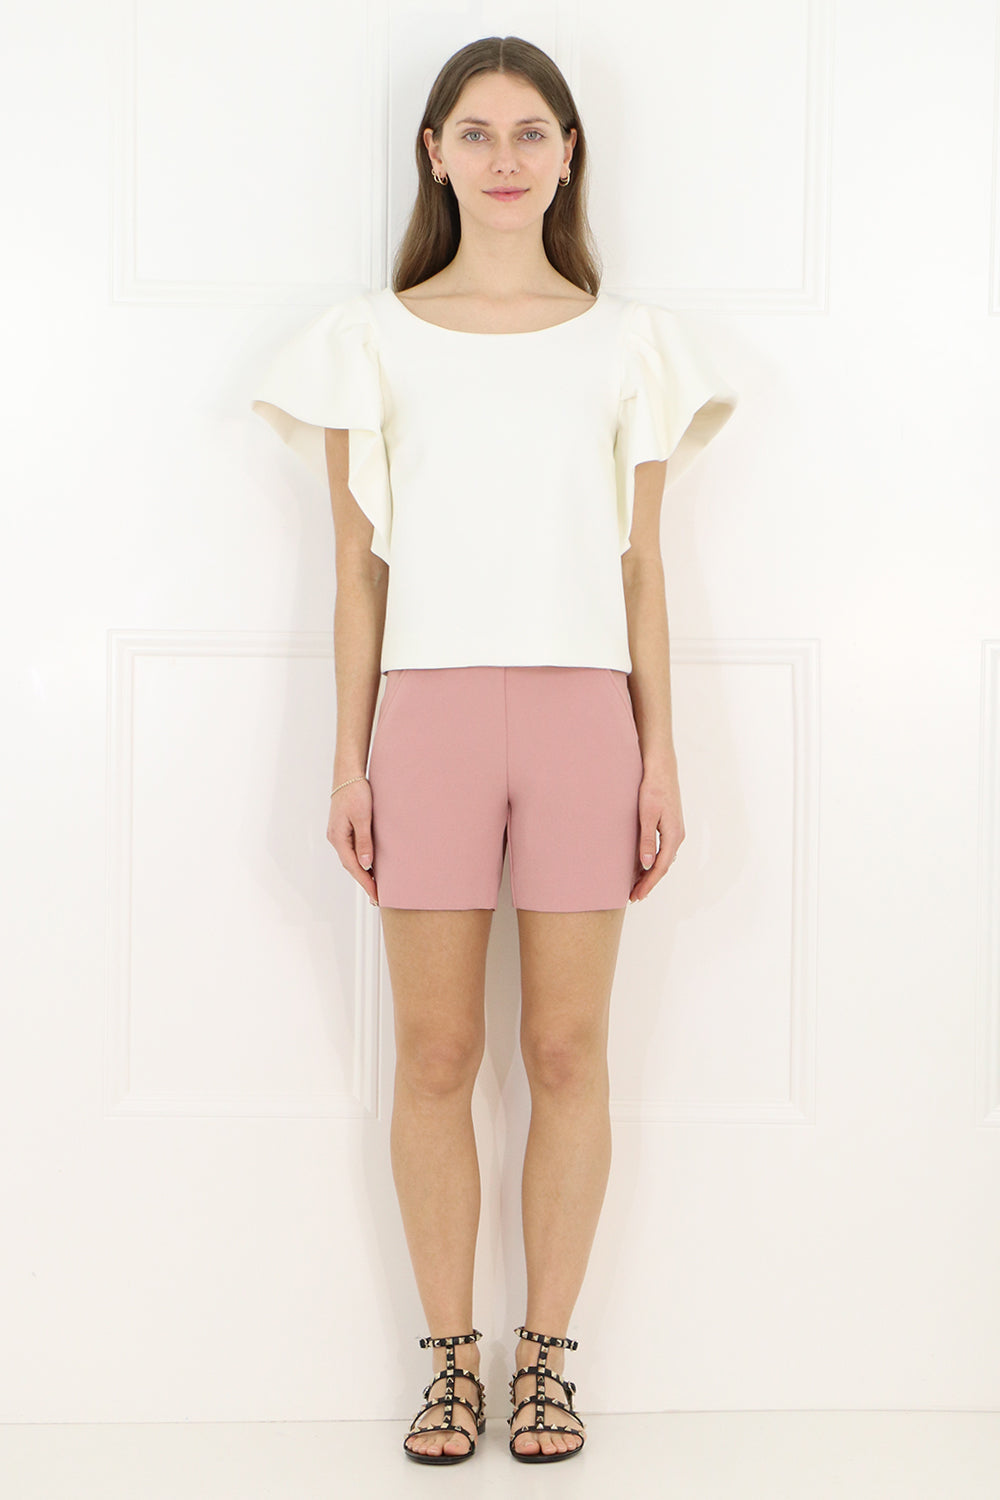 MAISON POI RTW TISSUE CROP TOP WITH PUFF SLEEVE IVORY